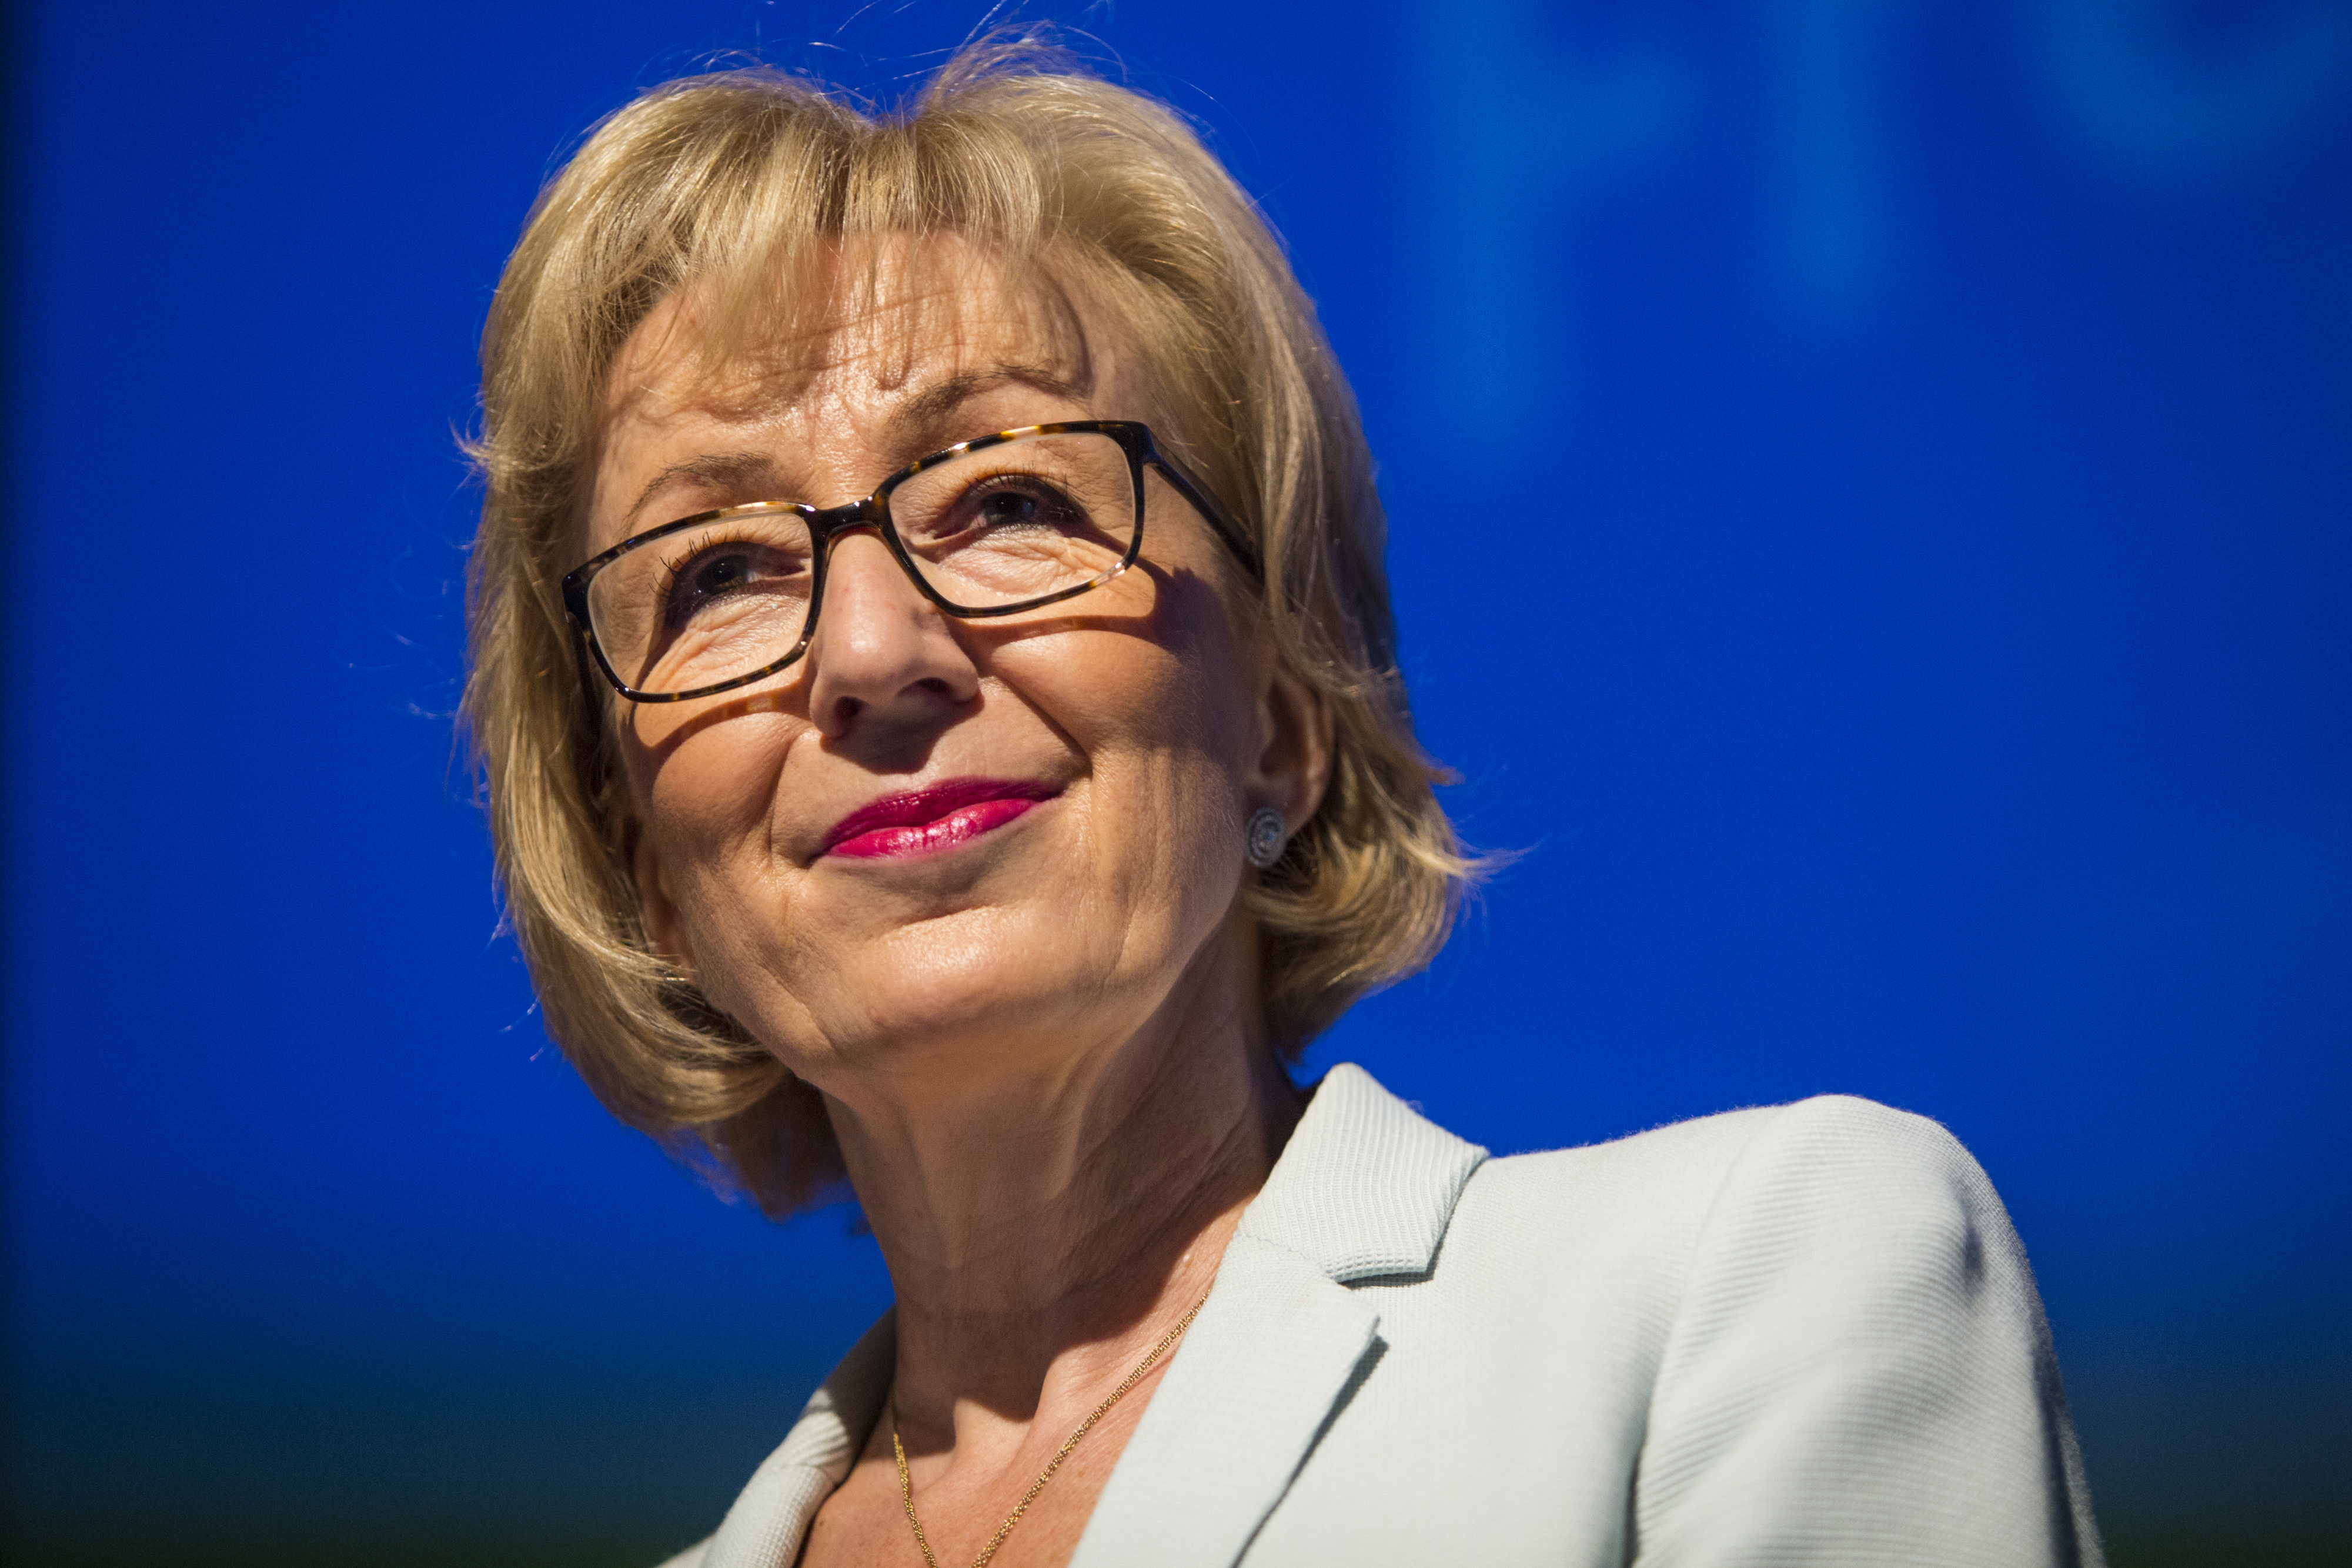 Andrea Leadsom, British Energy Minister and Conservative Party leadership contender, speaks at a campaign rally in London on July 7, 2016 (Jack Taylor—Getty Images)